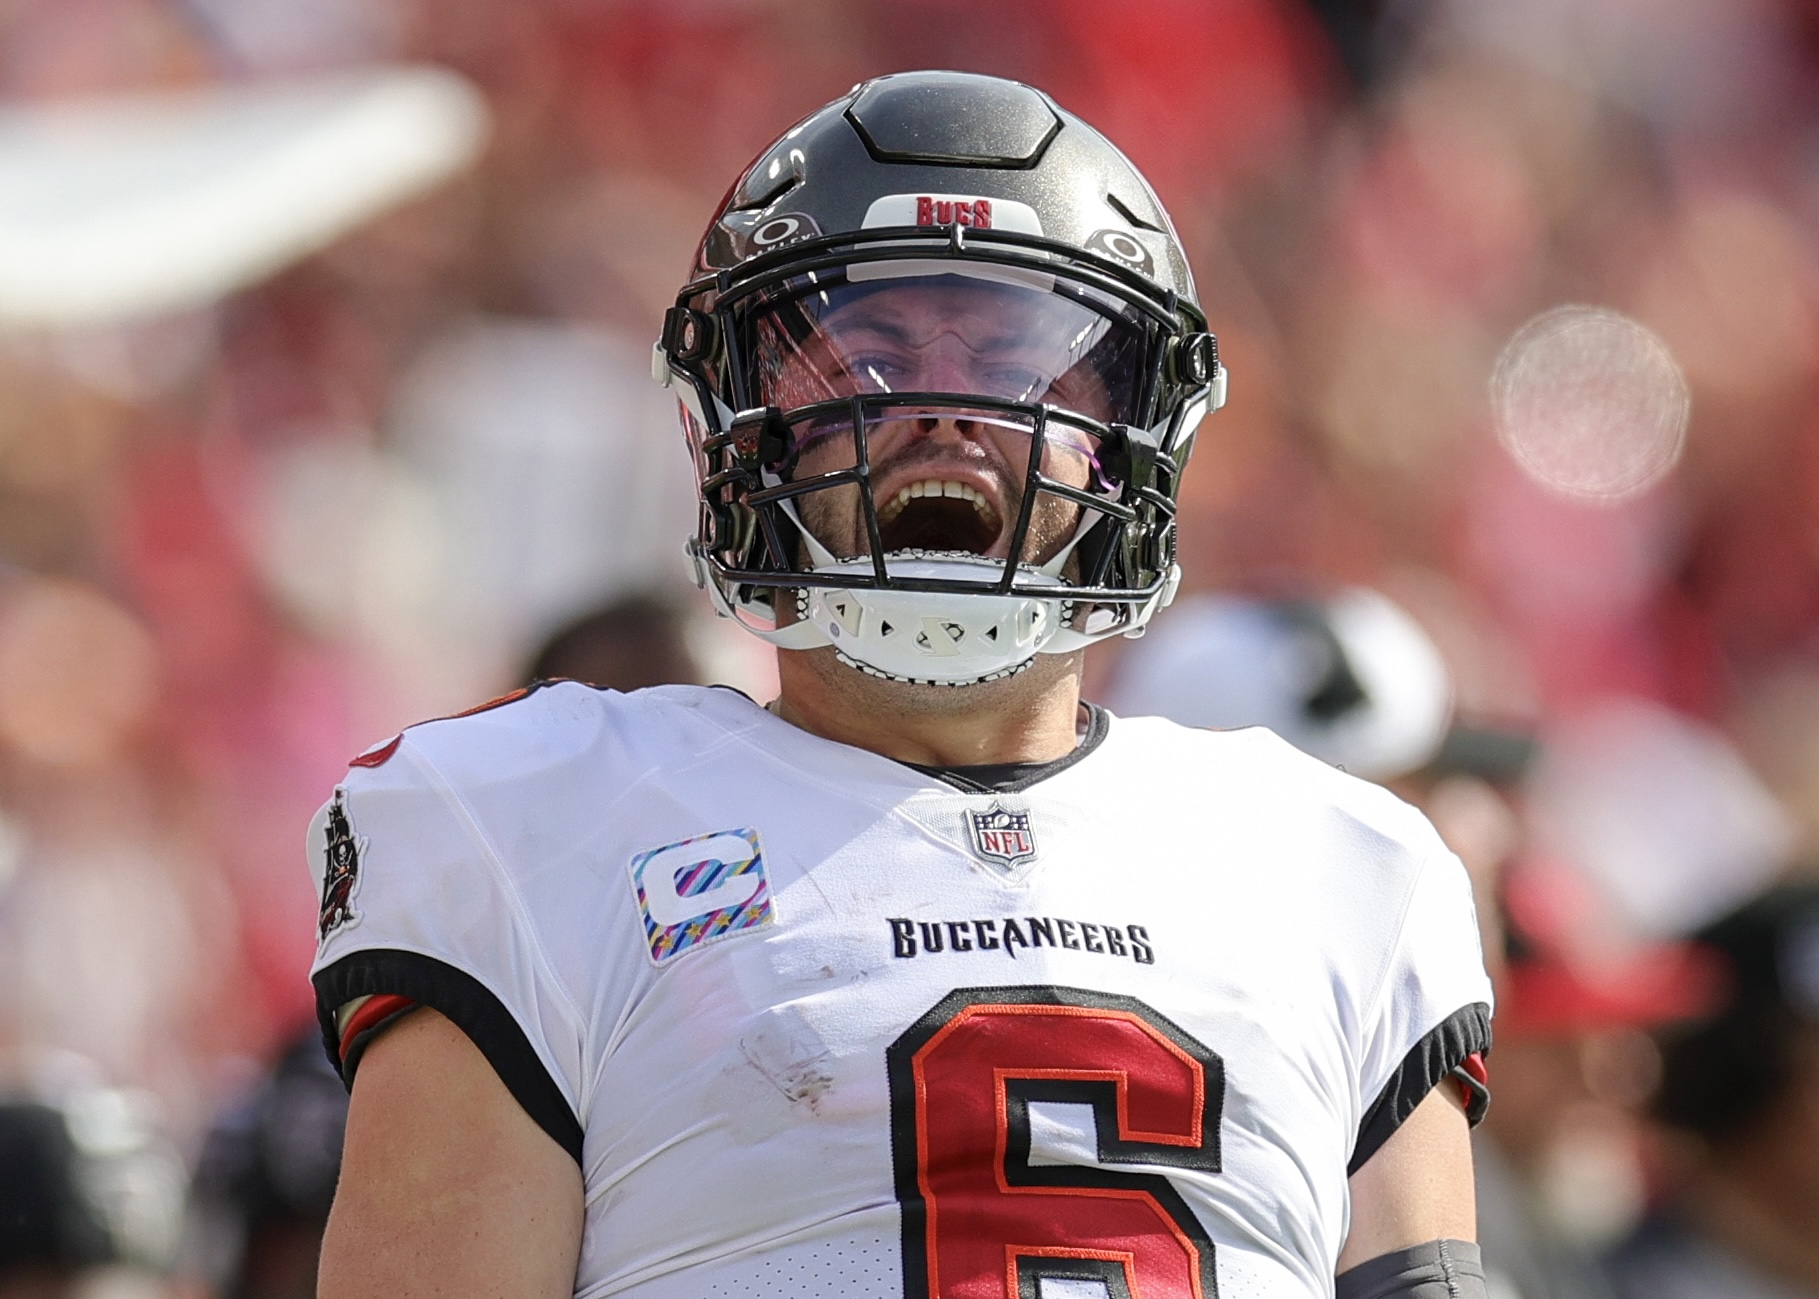 Keys To Cannon Fire: Tampa Bay Buccaneers at Houston Texans - Tampa Bay